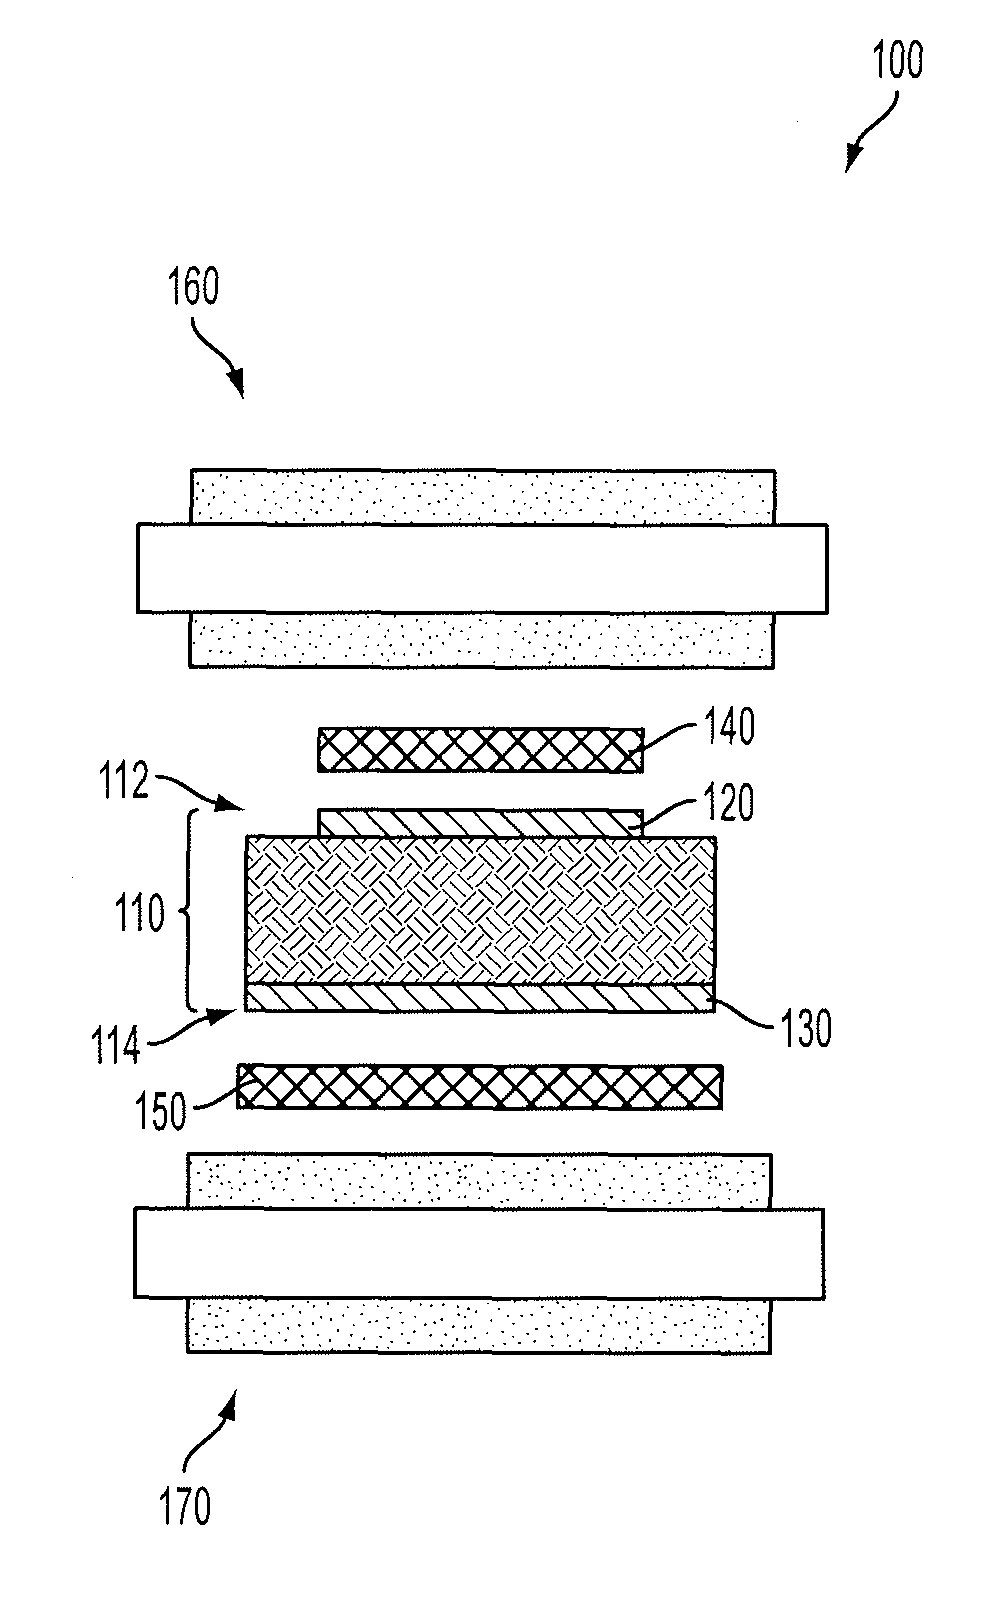 Transient liquid phase bonding process for double sided power modules